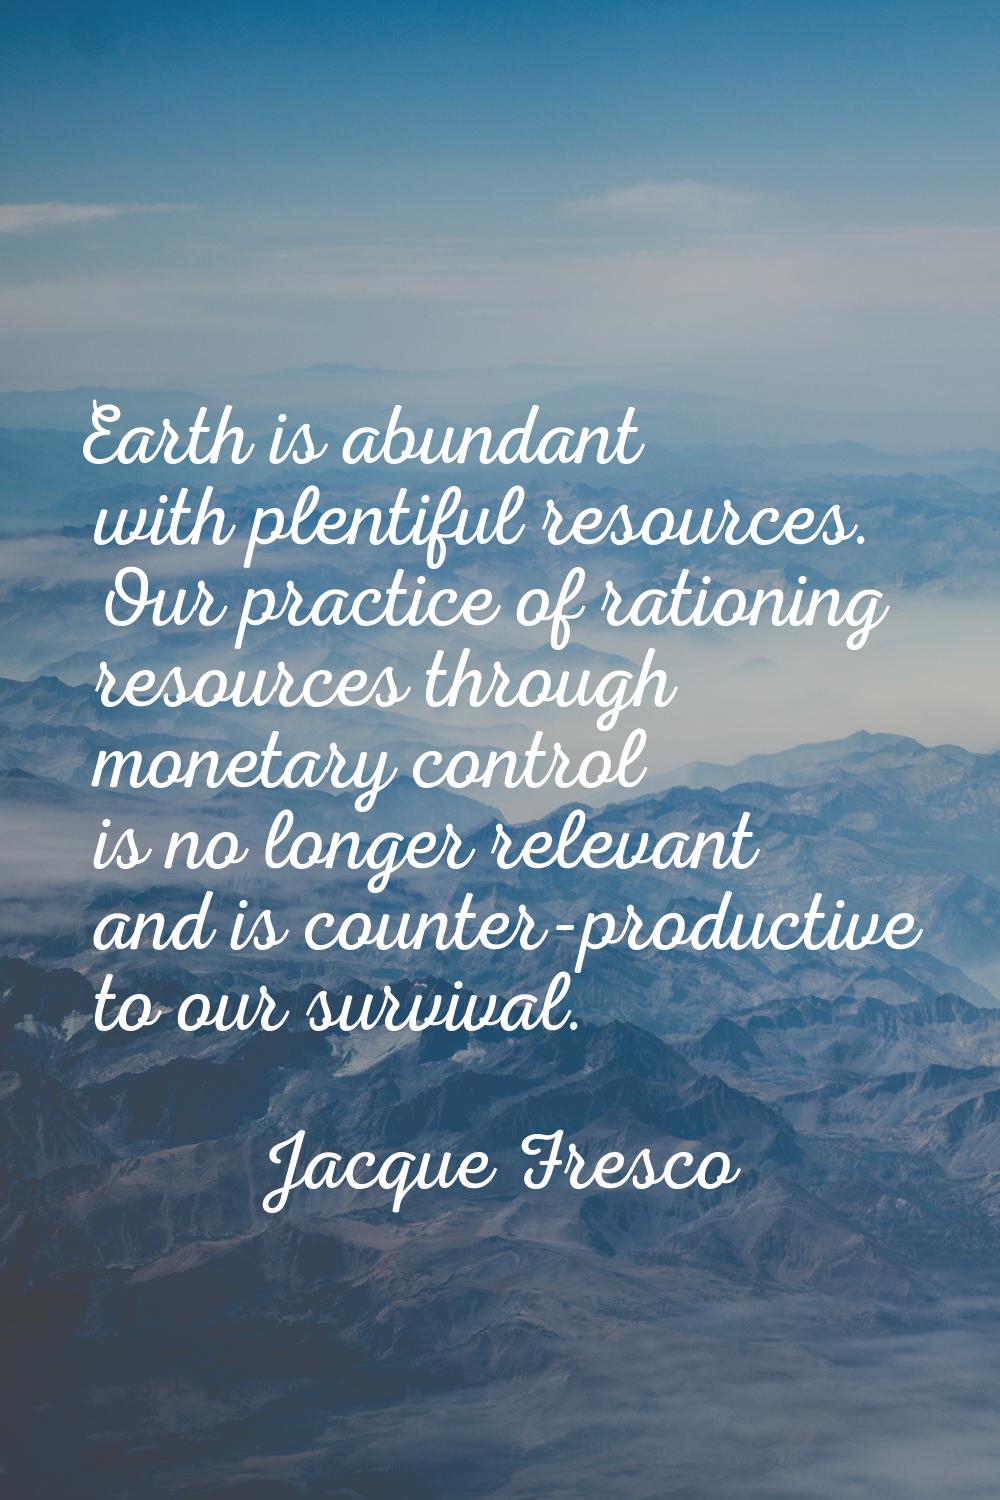 Earth is abundant with plentiful resources. Our practice of rationing resources through monetary co